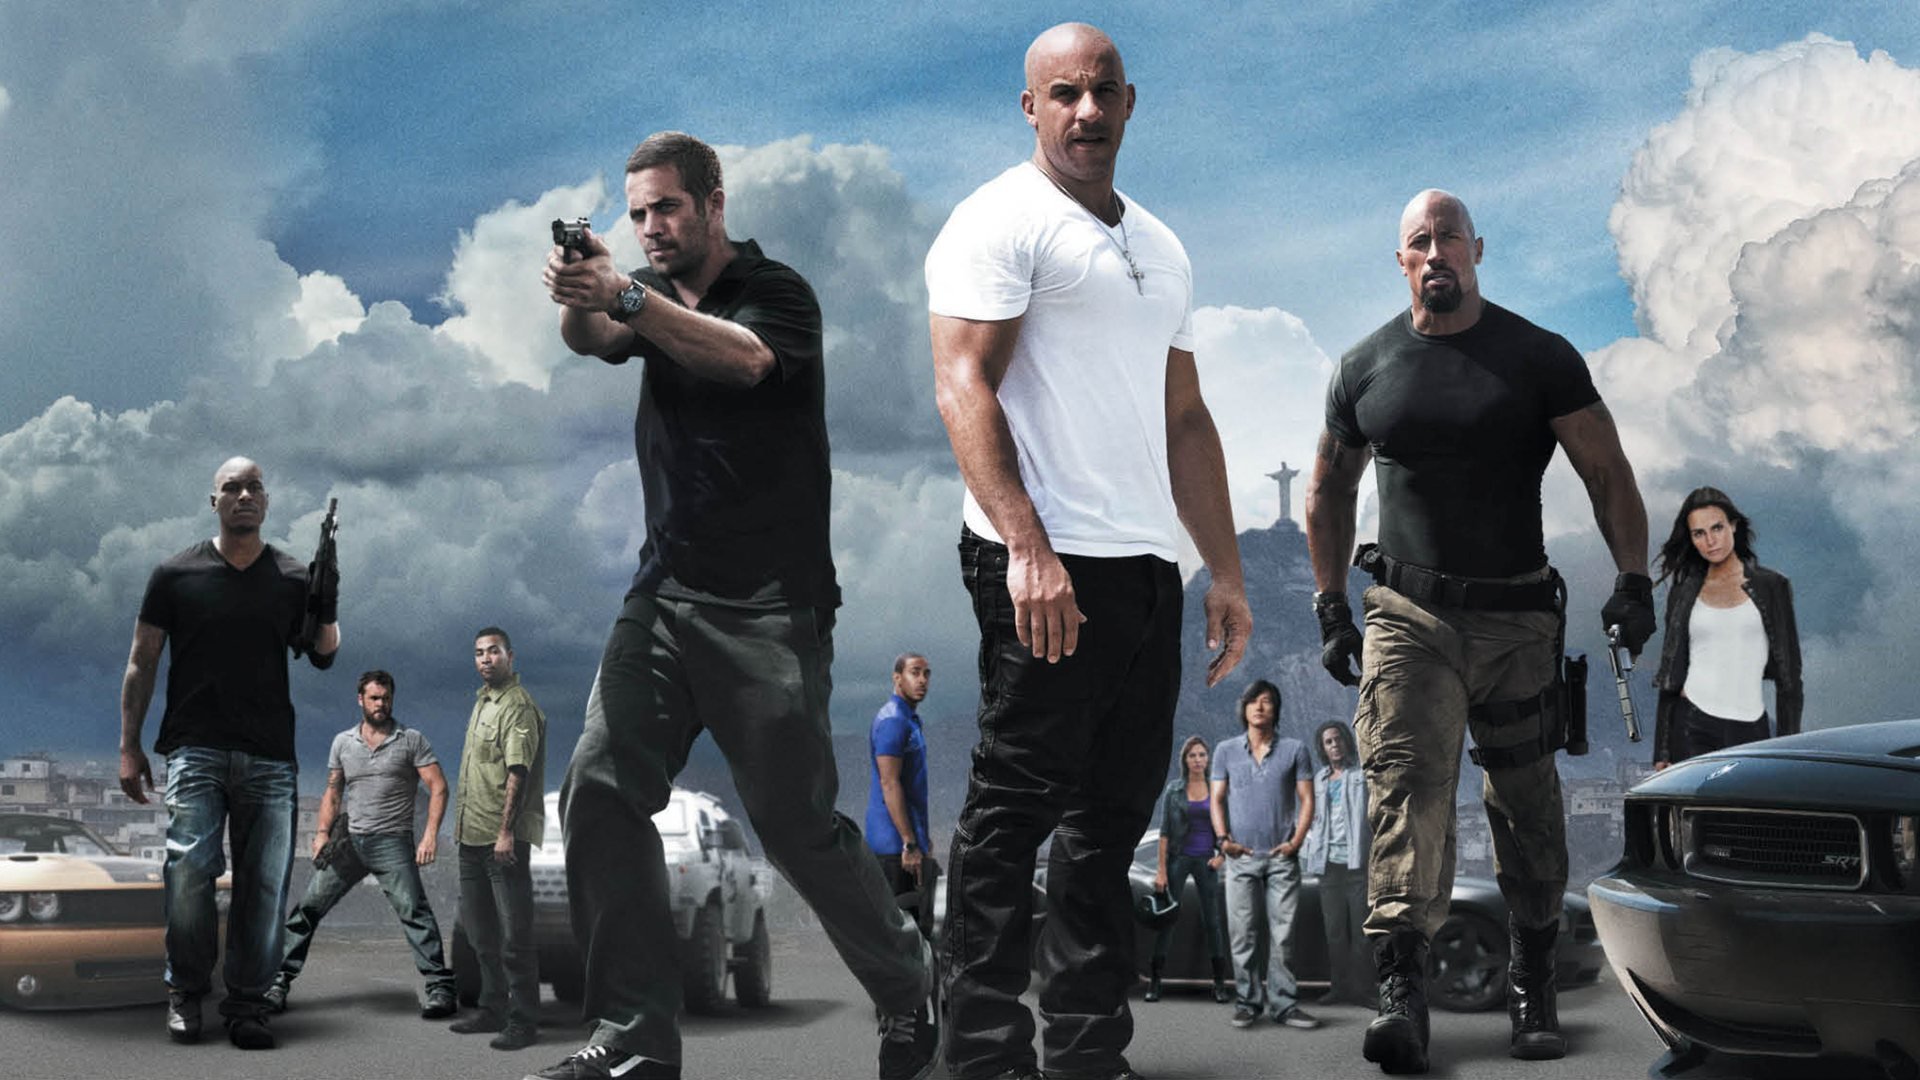 Ranking All 9 Fast & Furious Movies for the Series' 20th Anniversary